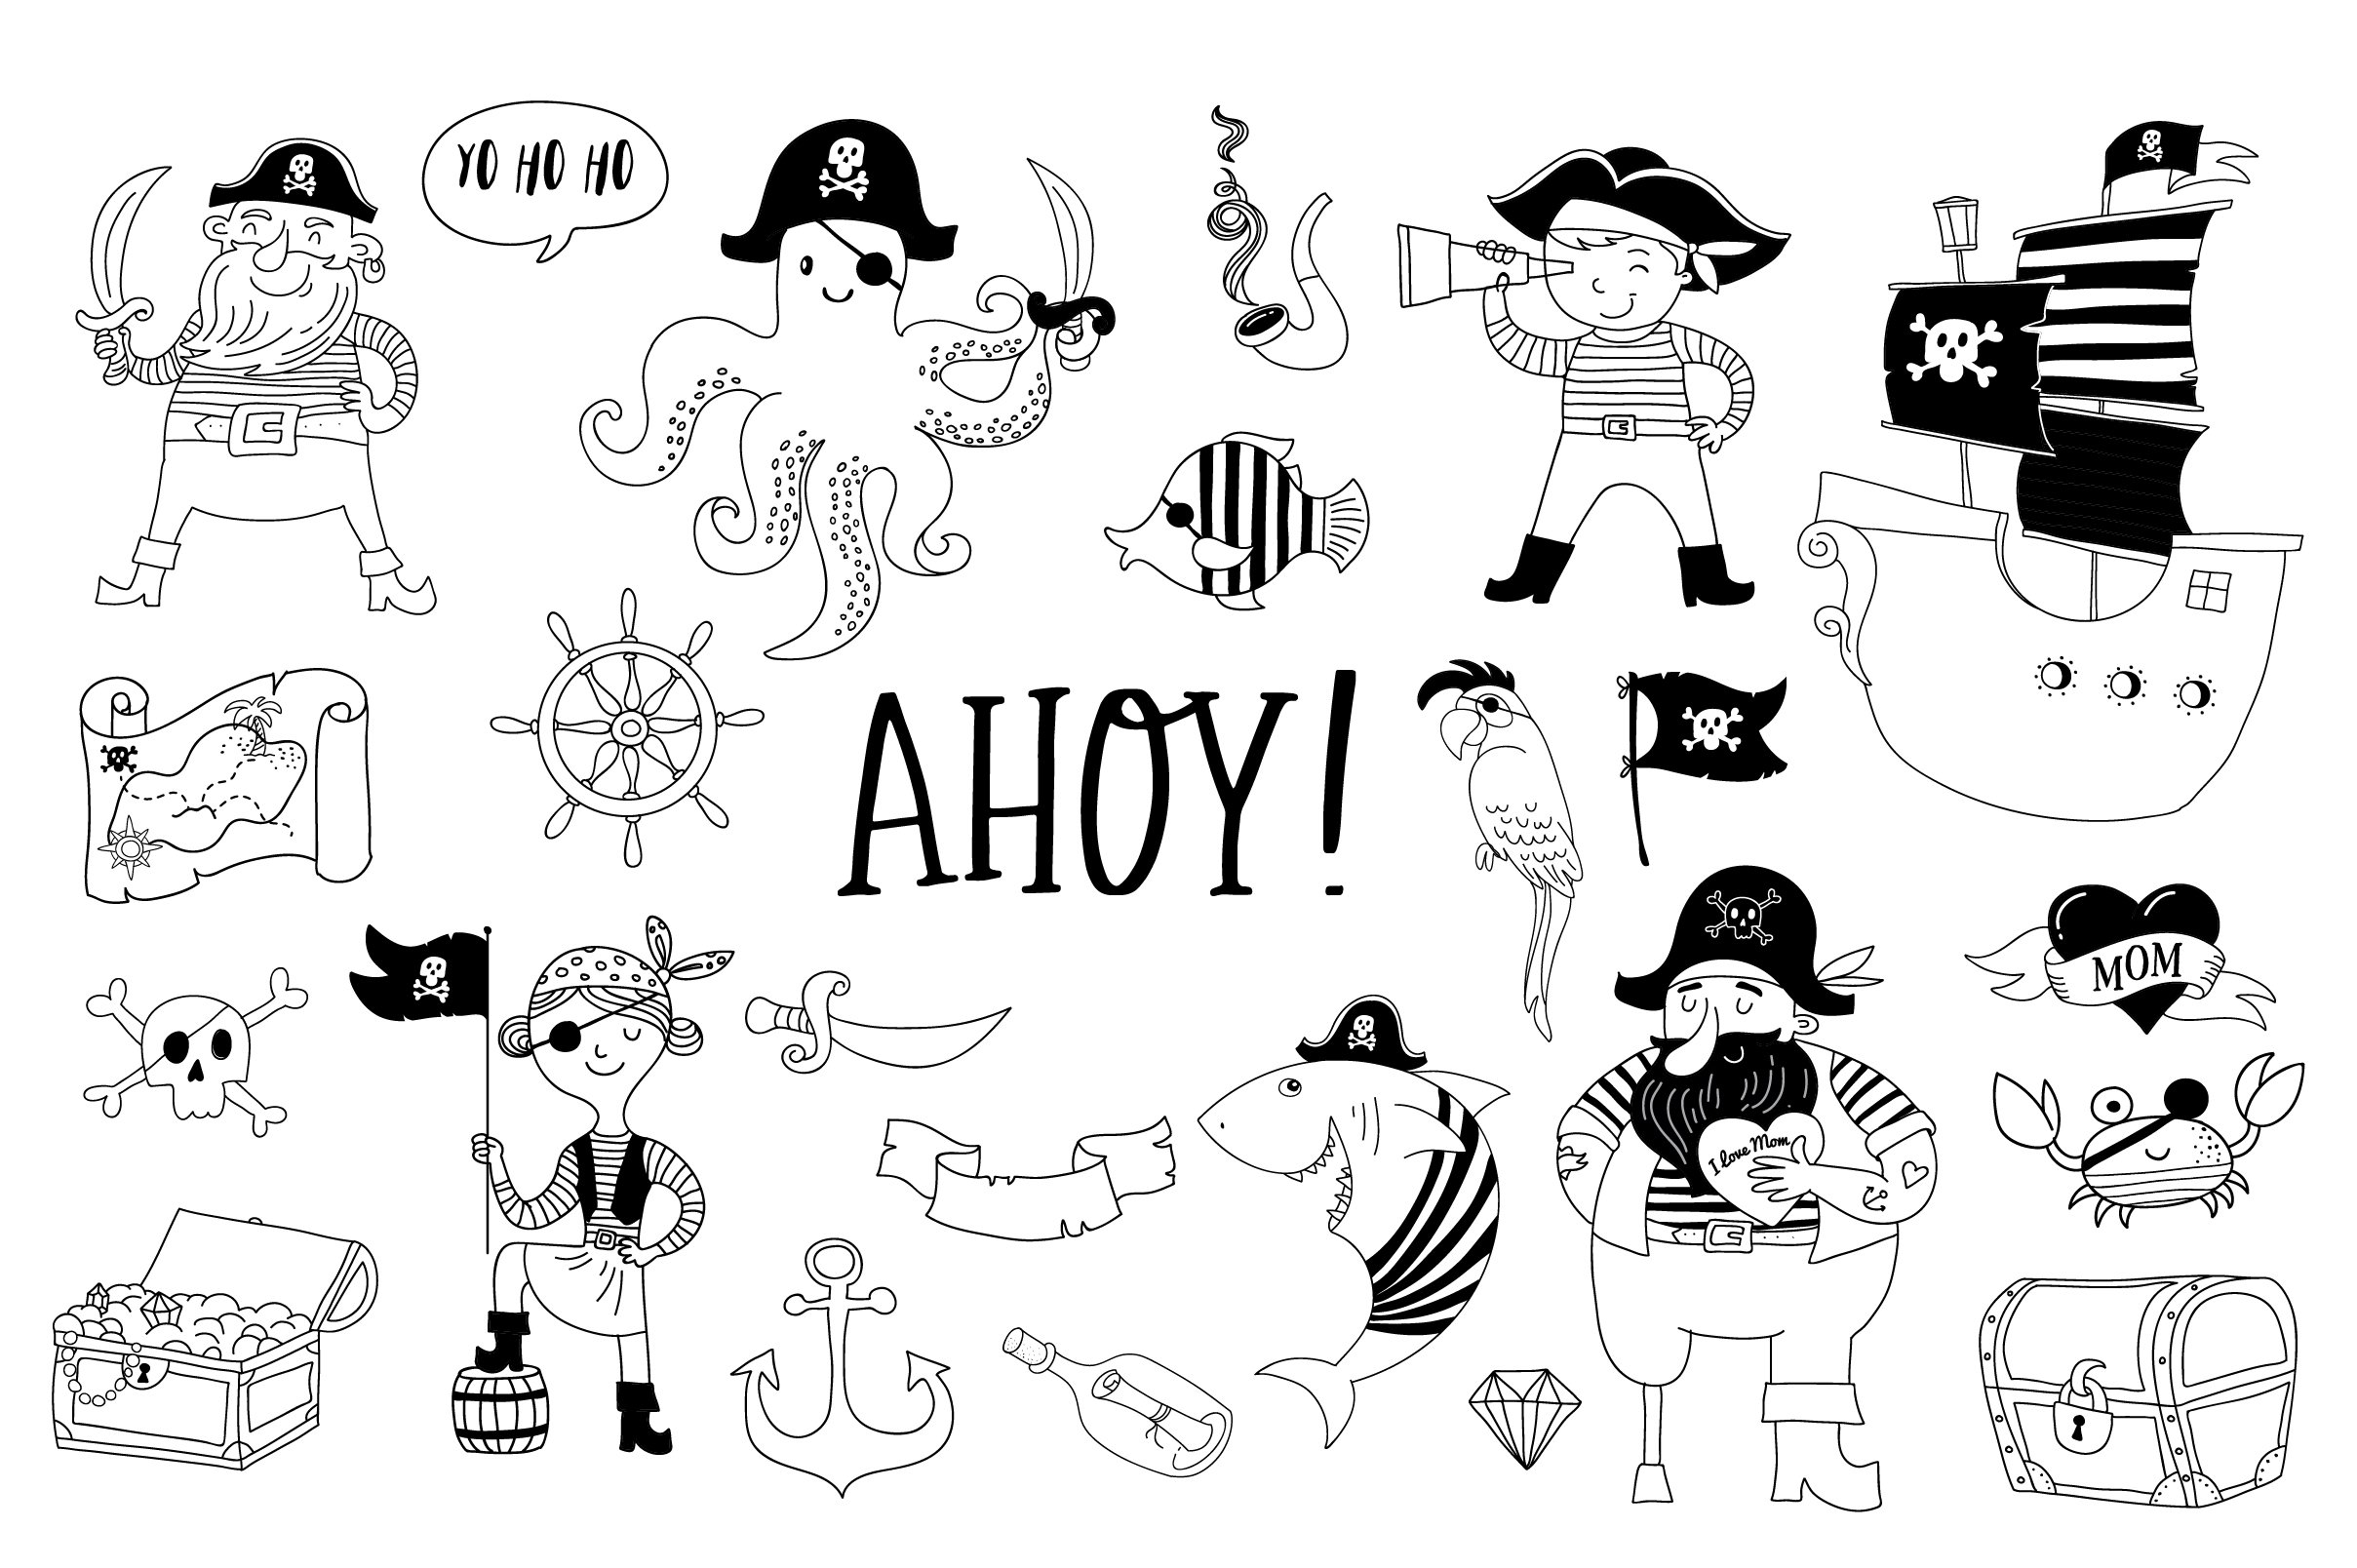 BW pirates in an outline.